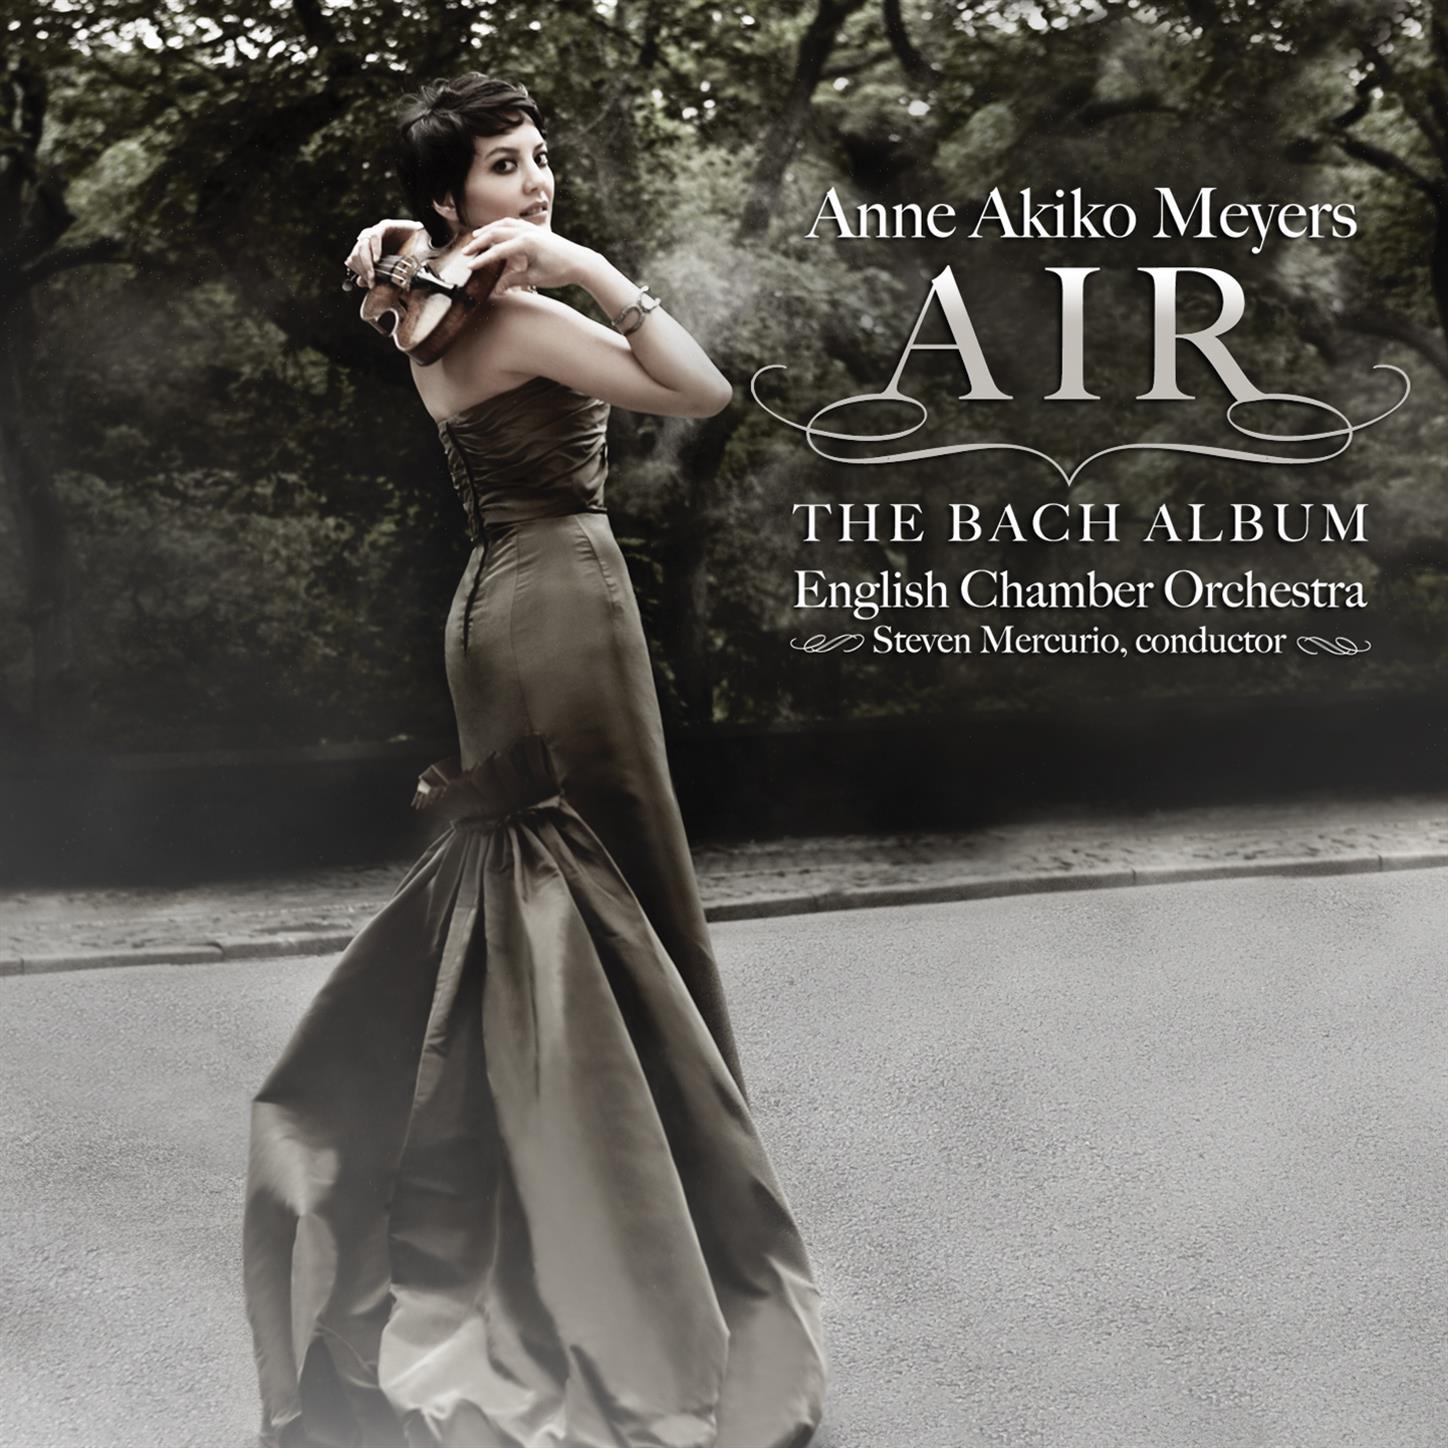 " Air" from Orchestral Suite No. 3 in D major, BWV 1068